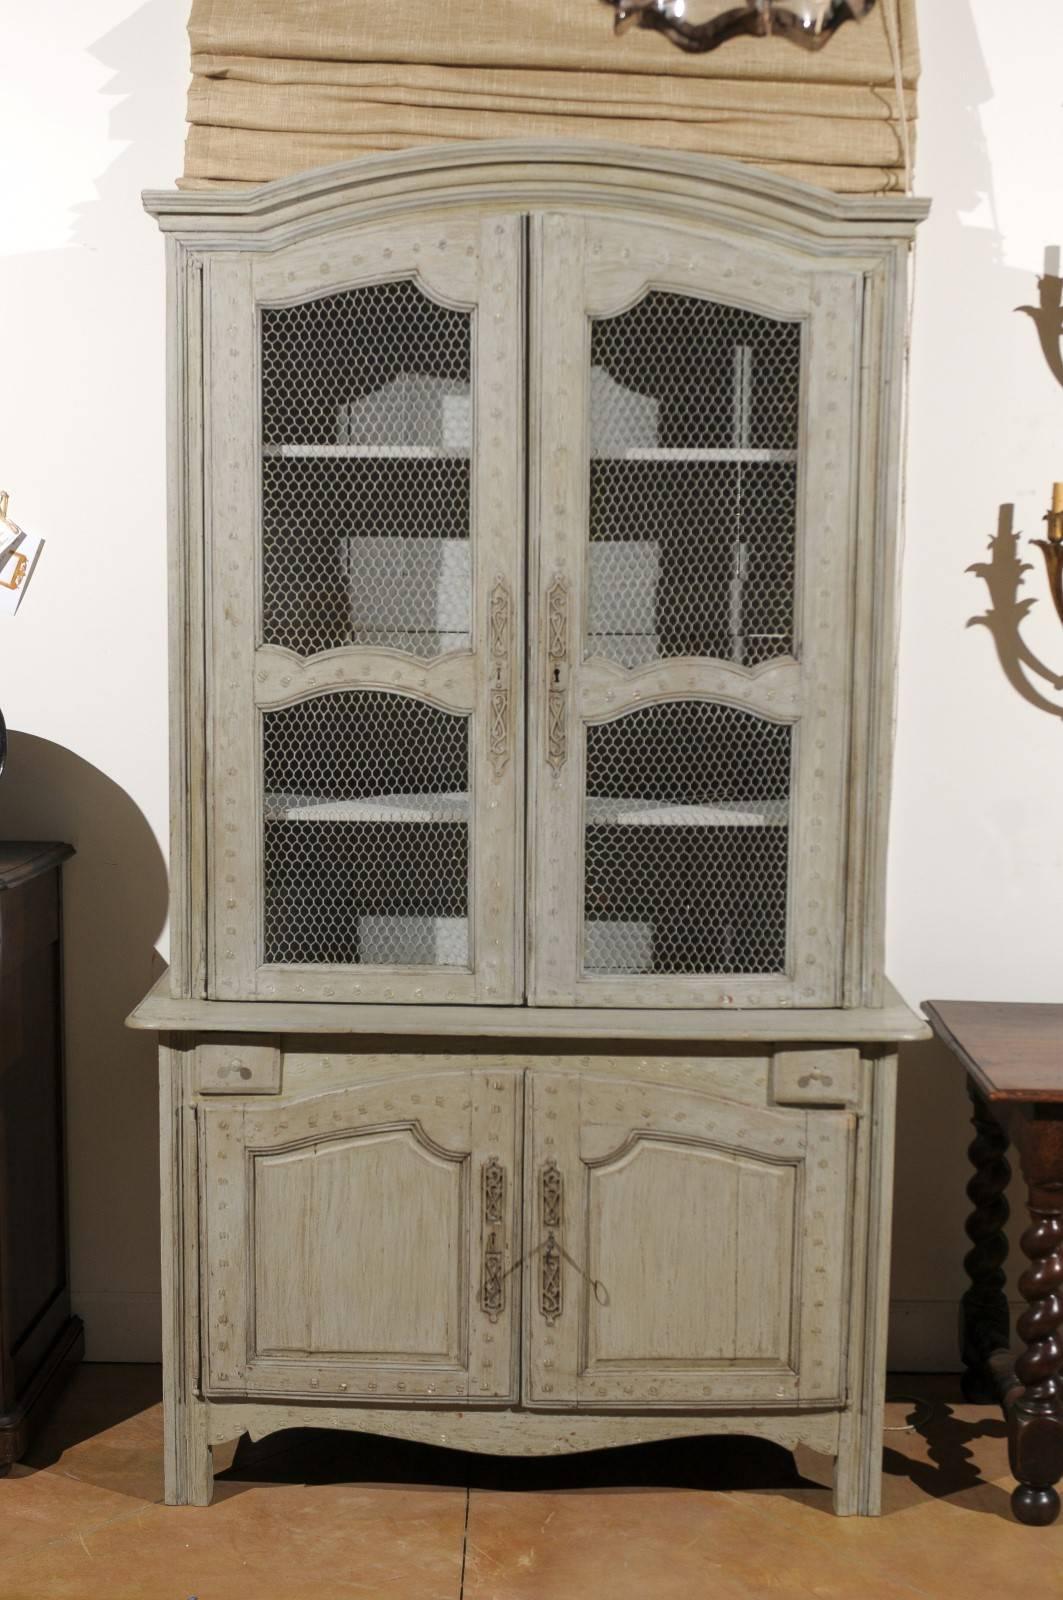 A French painted wood buffet à deux-corps with bonnet shaped upper cabinet and chicken wire doors over two lowers doors from the mid 18th century. Born under the reign of King Louis XV in the mid 18th century, this French tall cabinet features a